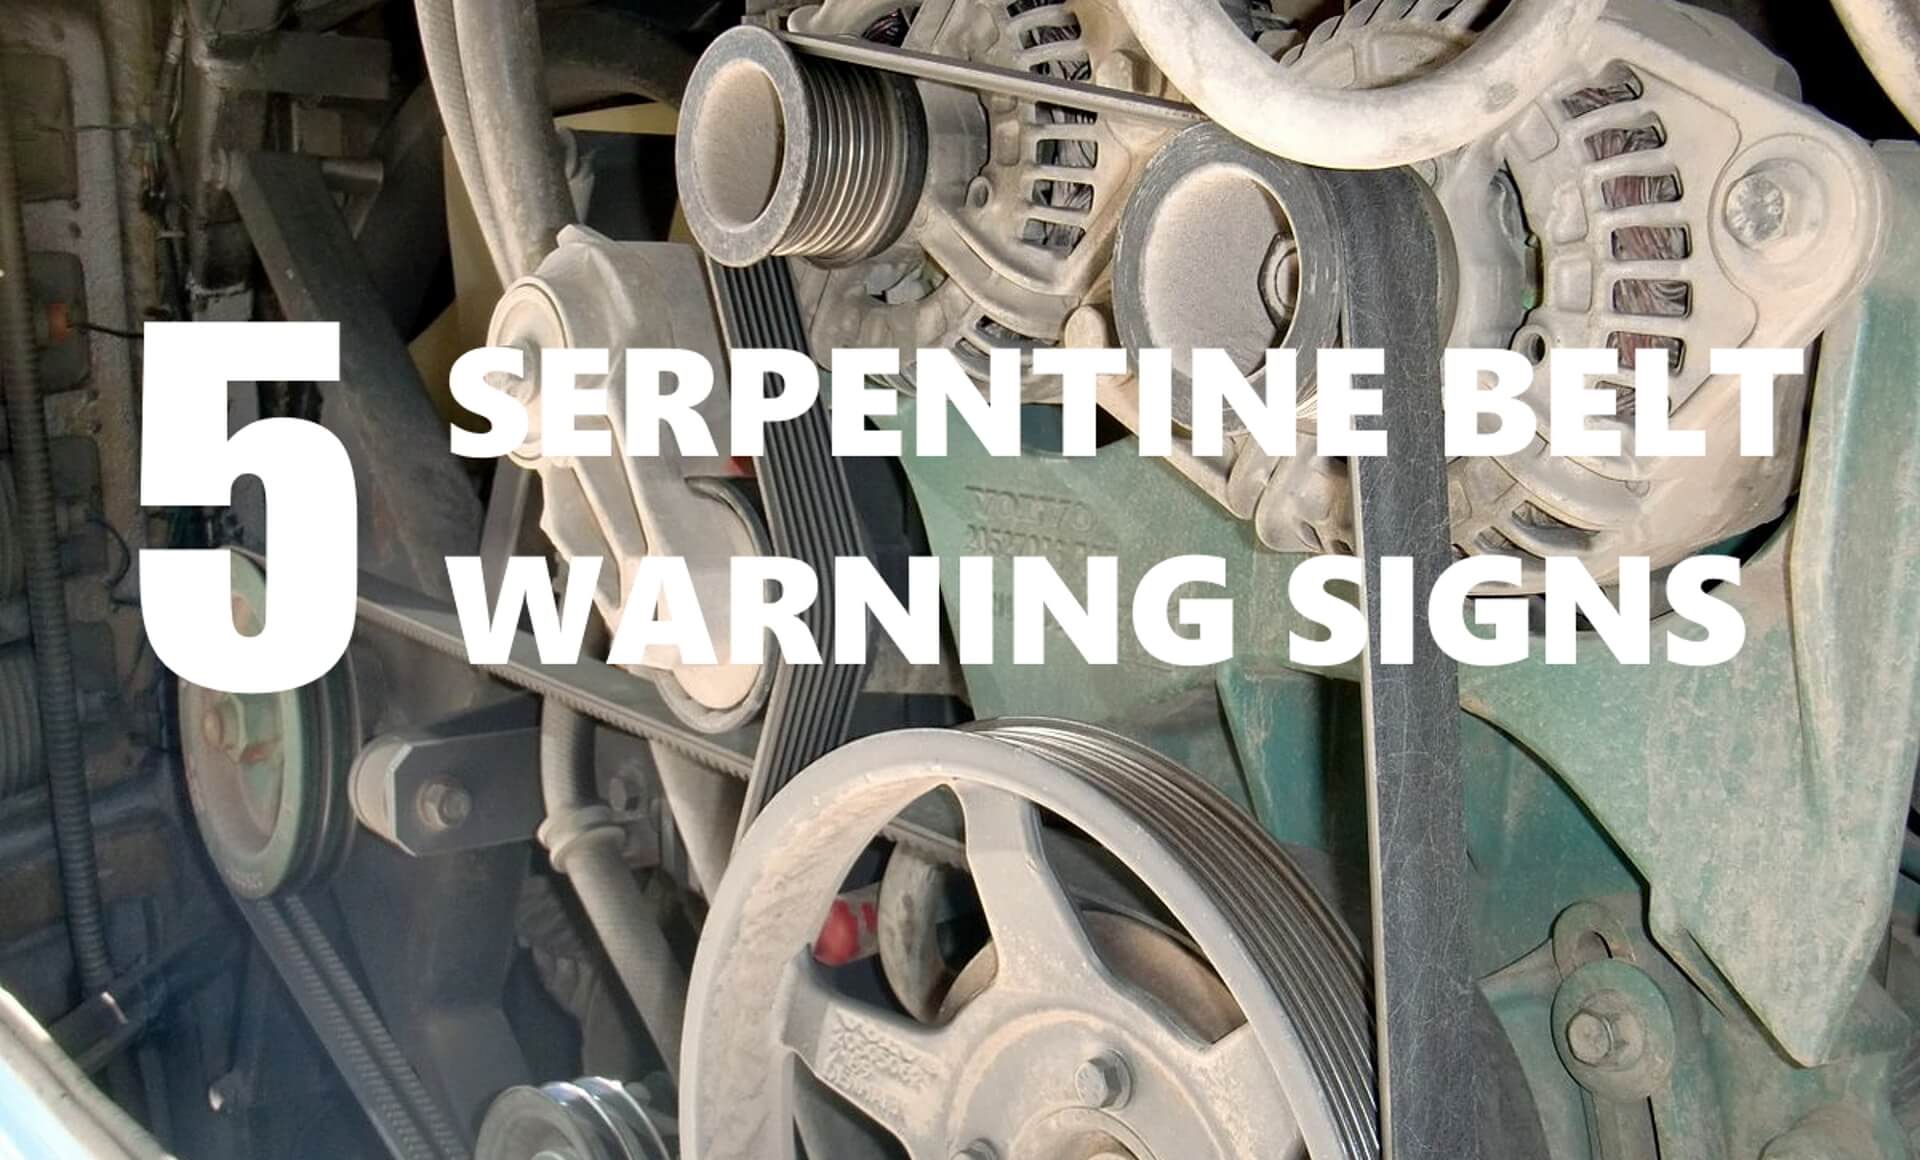 When to Replace the Drive Belt - Common Signs & Symptoms